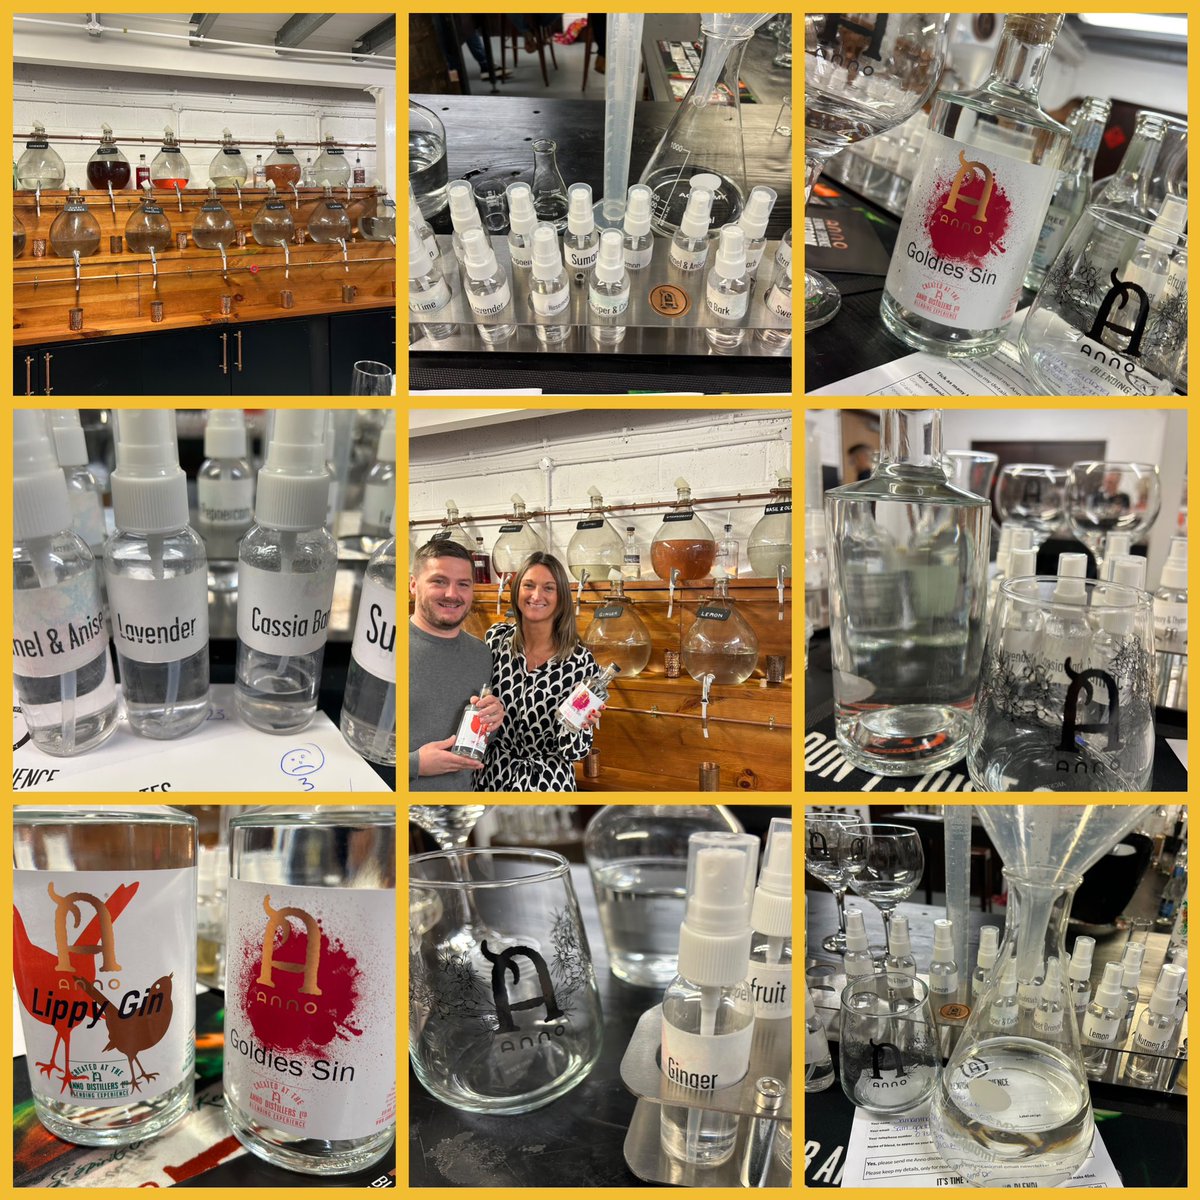 Brilliant gin blending experience @annodistillers 
Anyone stuck for a Christmas gift this year, this is brilliant.
#gin #kent #anno